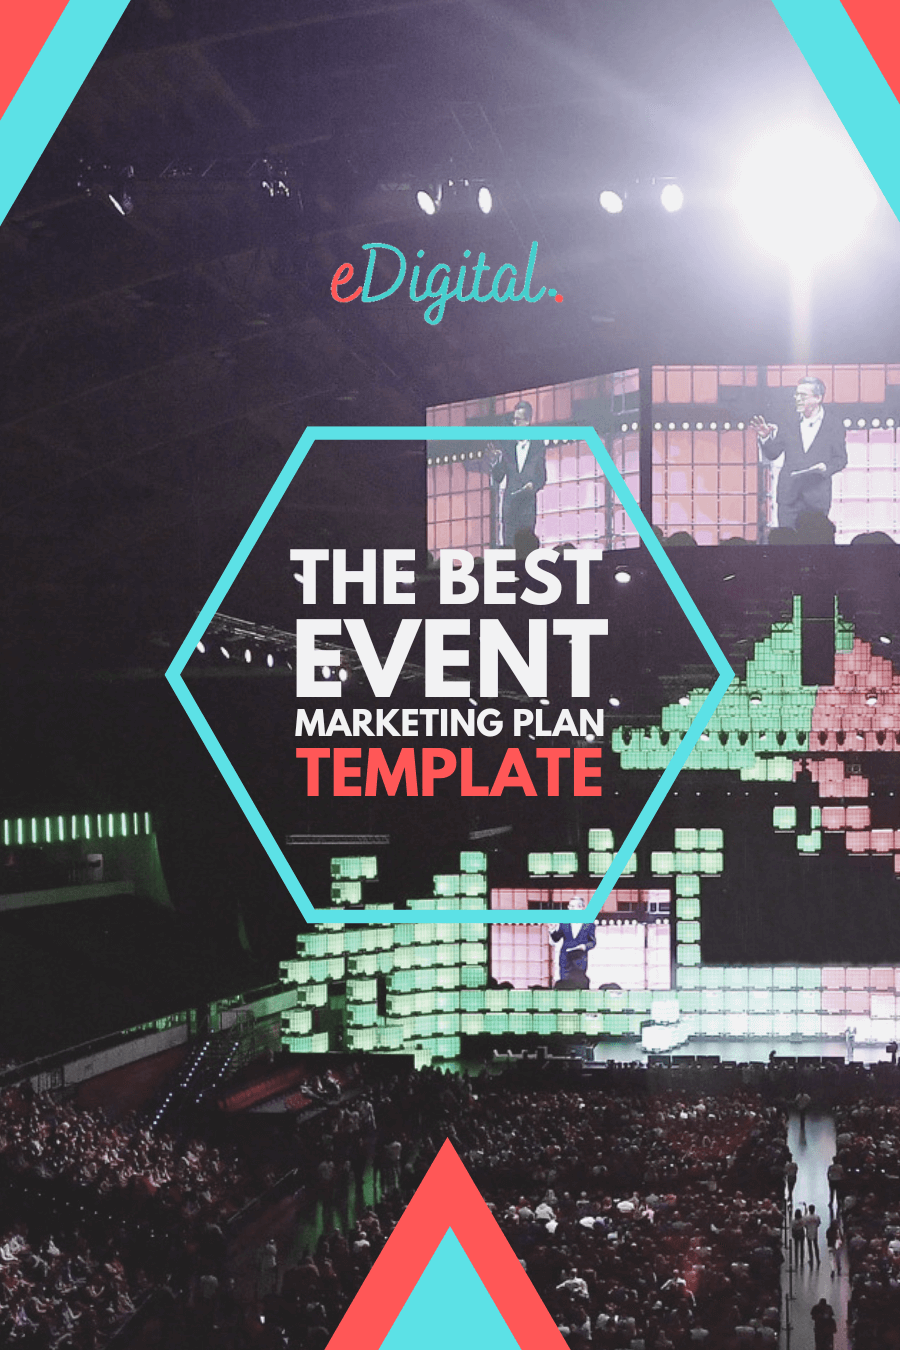 HOW TO WRITE THE BEST EVENT MARKETING PLAN TEMPLATE IN 2023